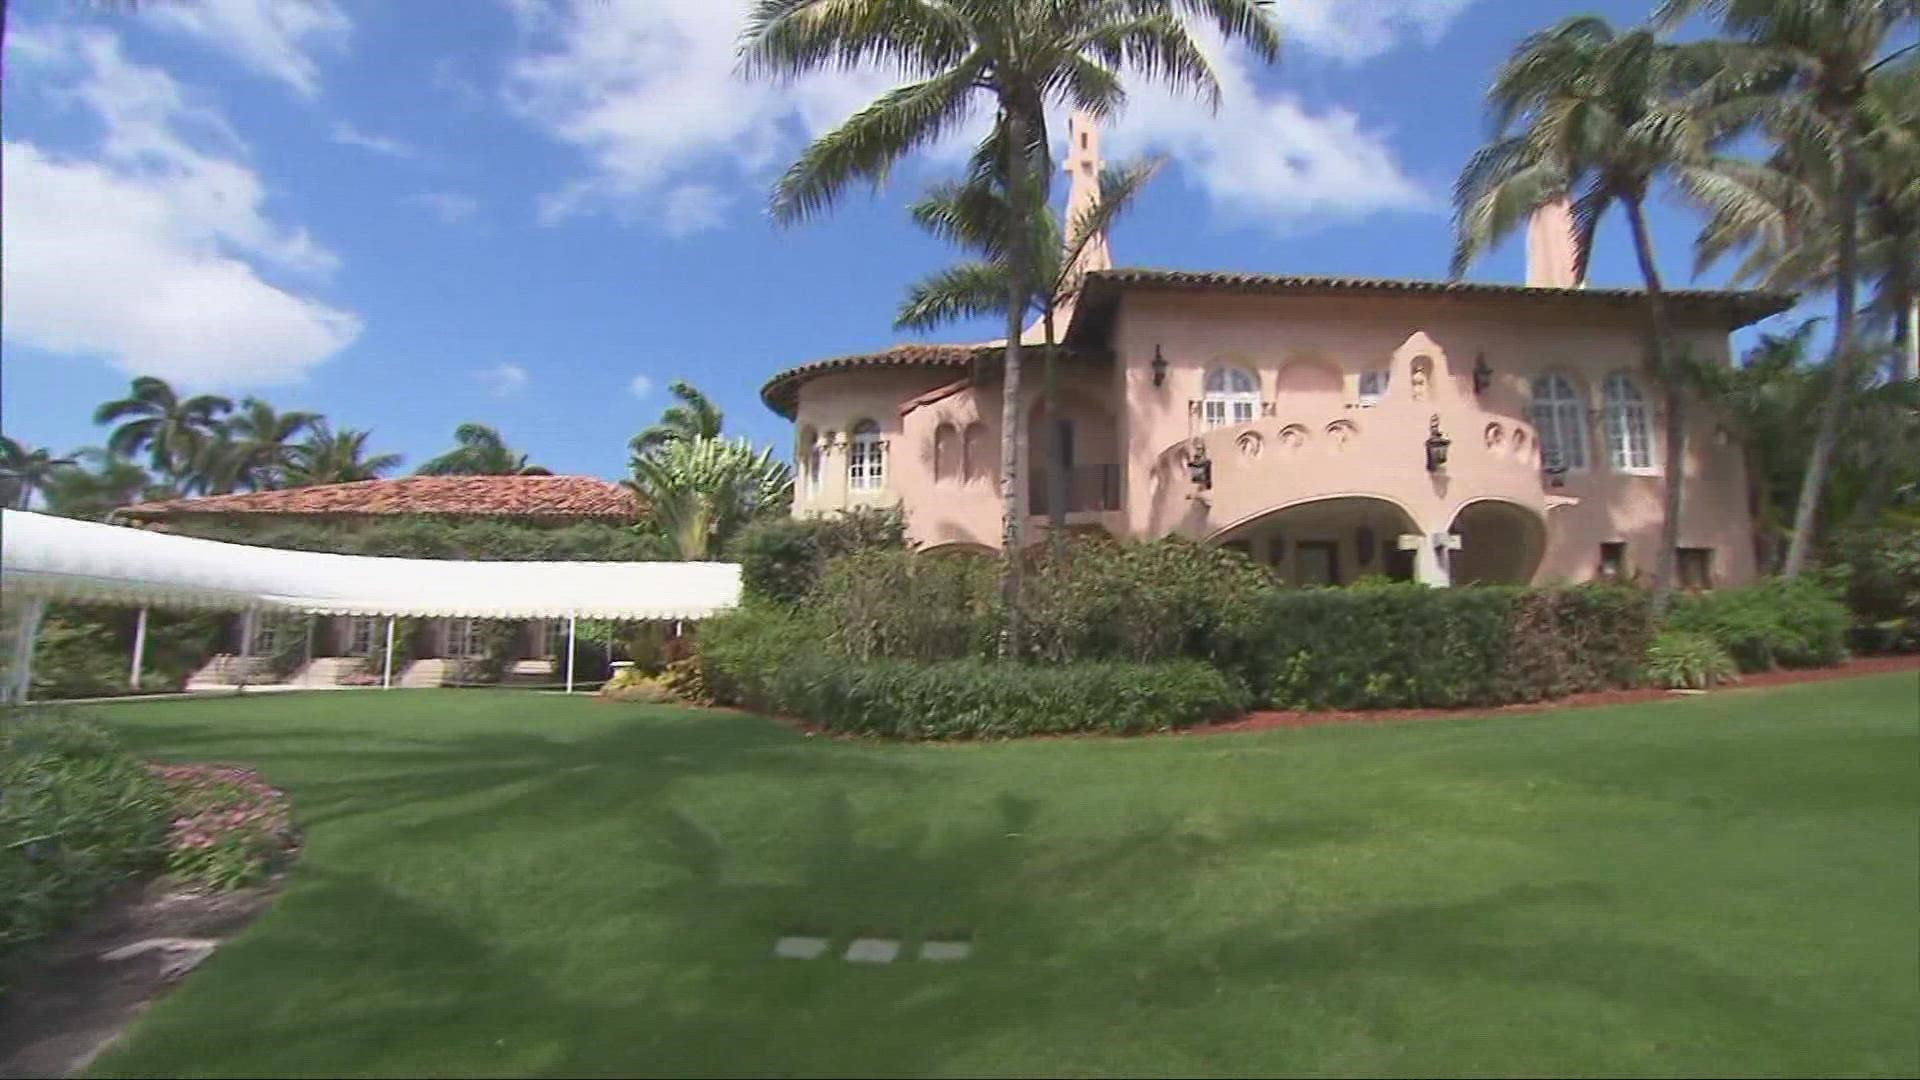 An AP source said the search was related to a probe of whether Trump had taken classified records from his White House tenure to his Florida estate.